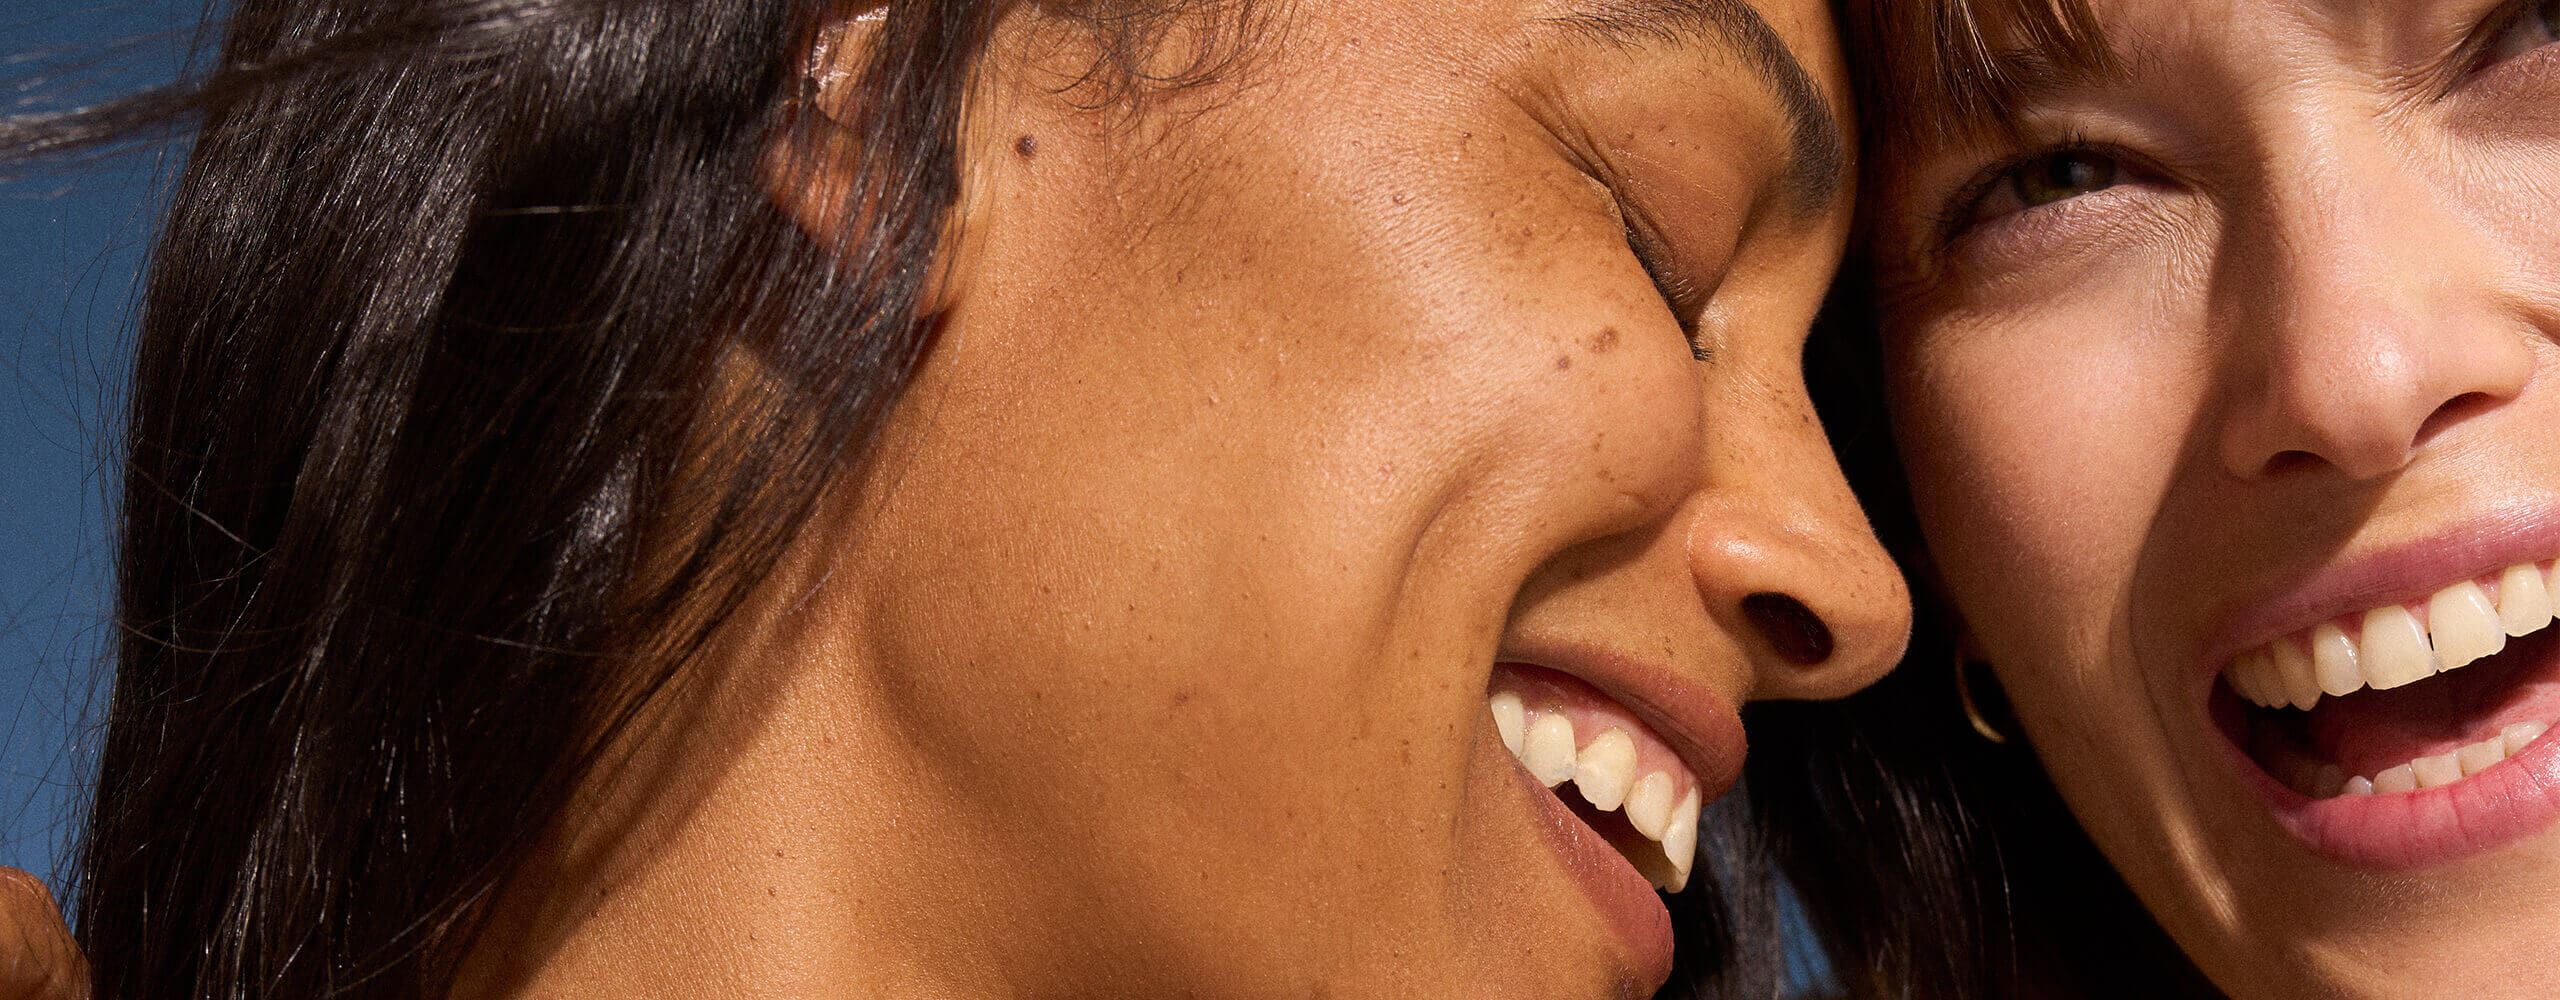 A view of two people's faces closely touching together while smiling.